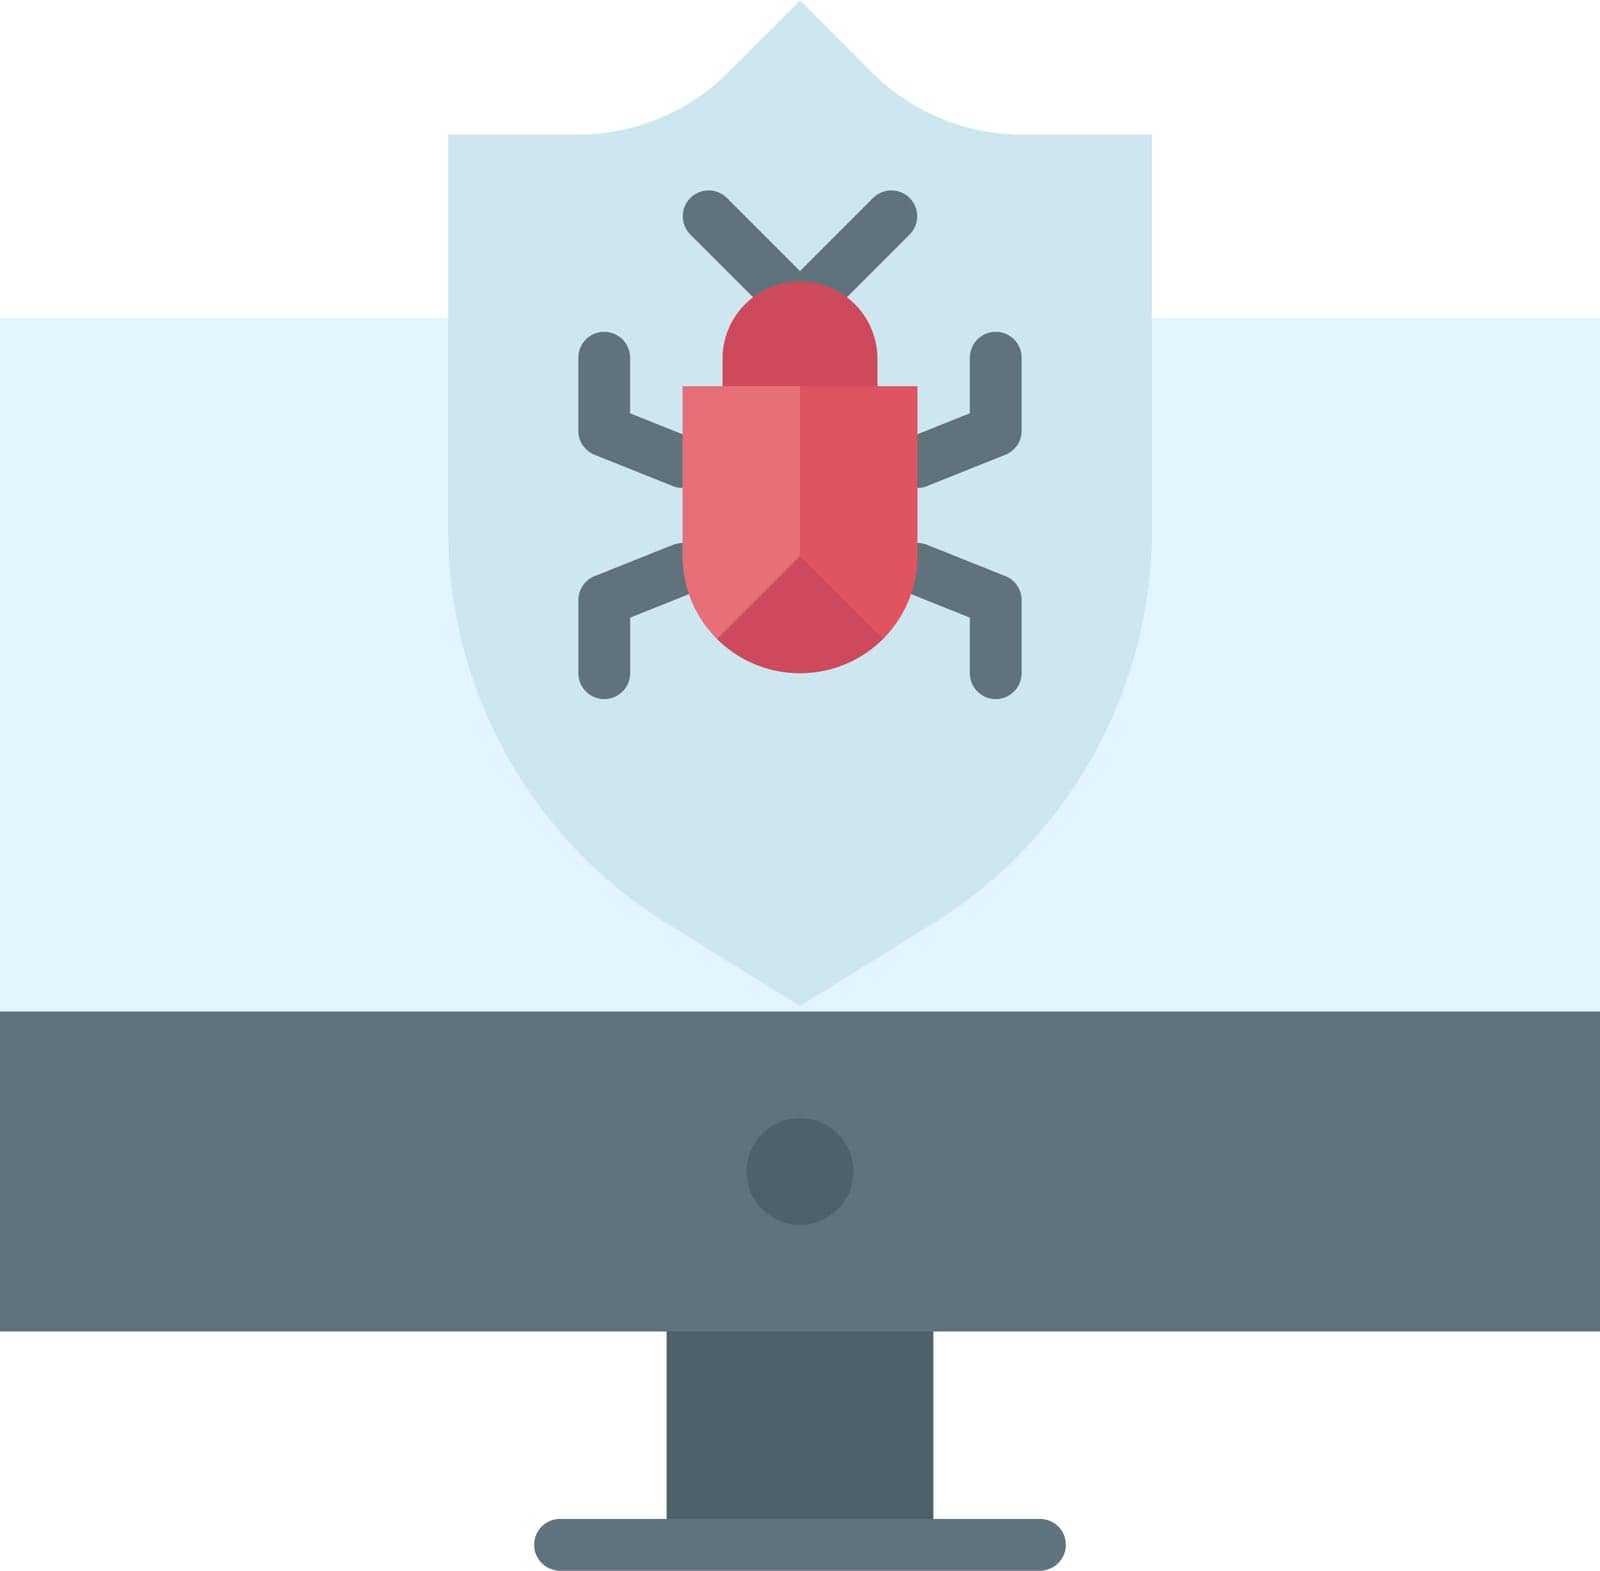 Infected Icon image. Suitable for mobile application.